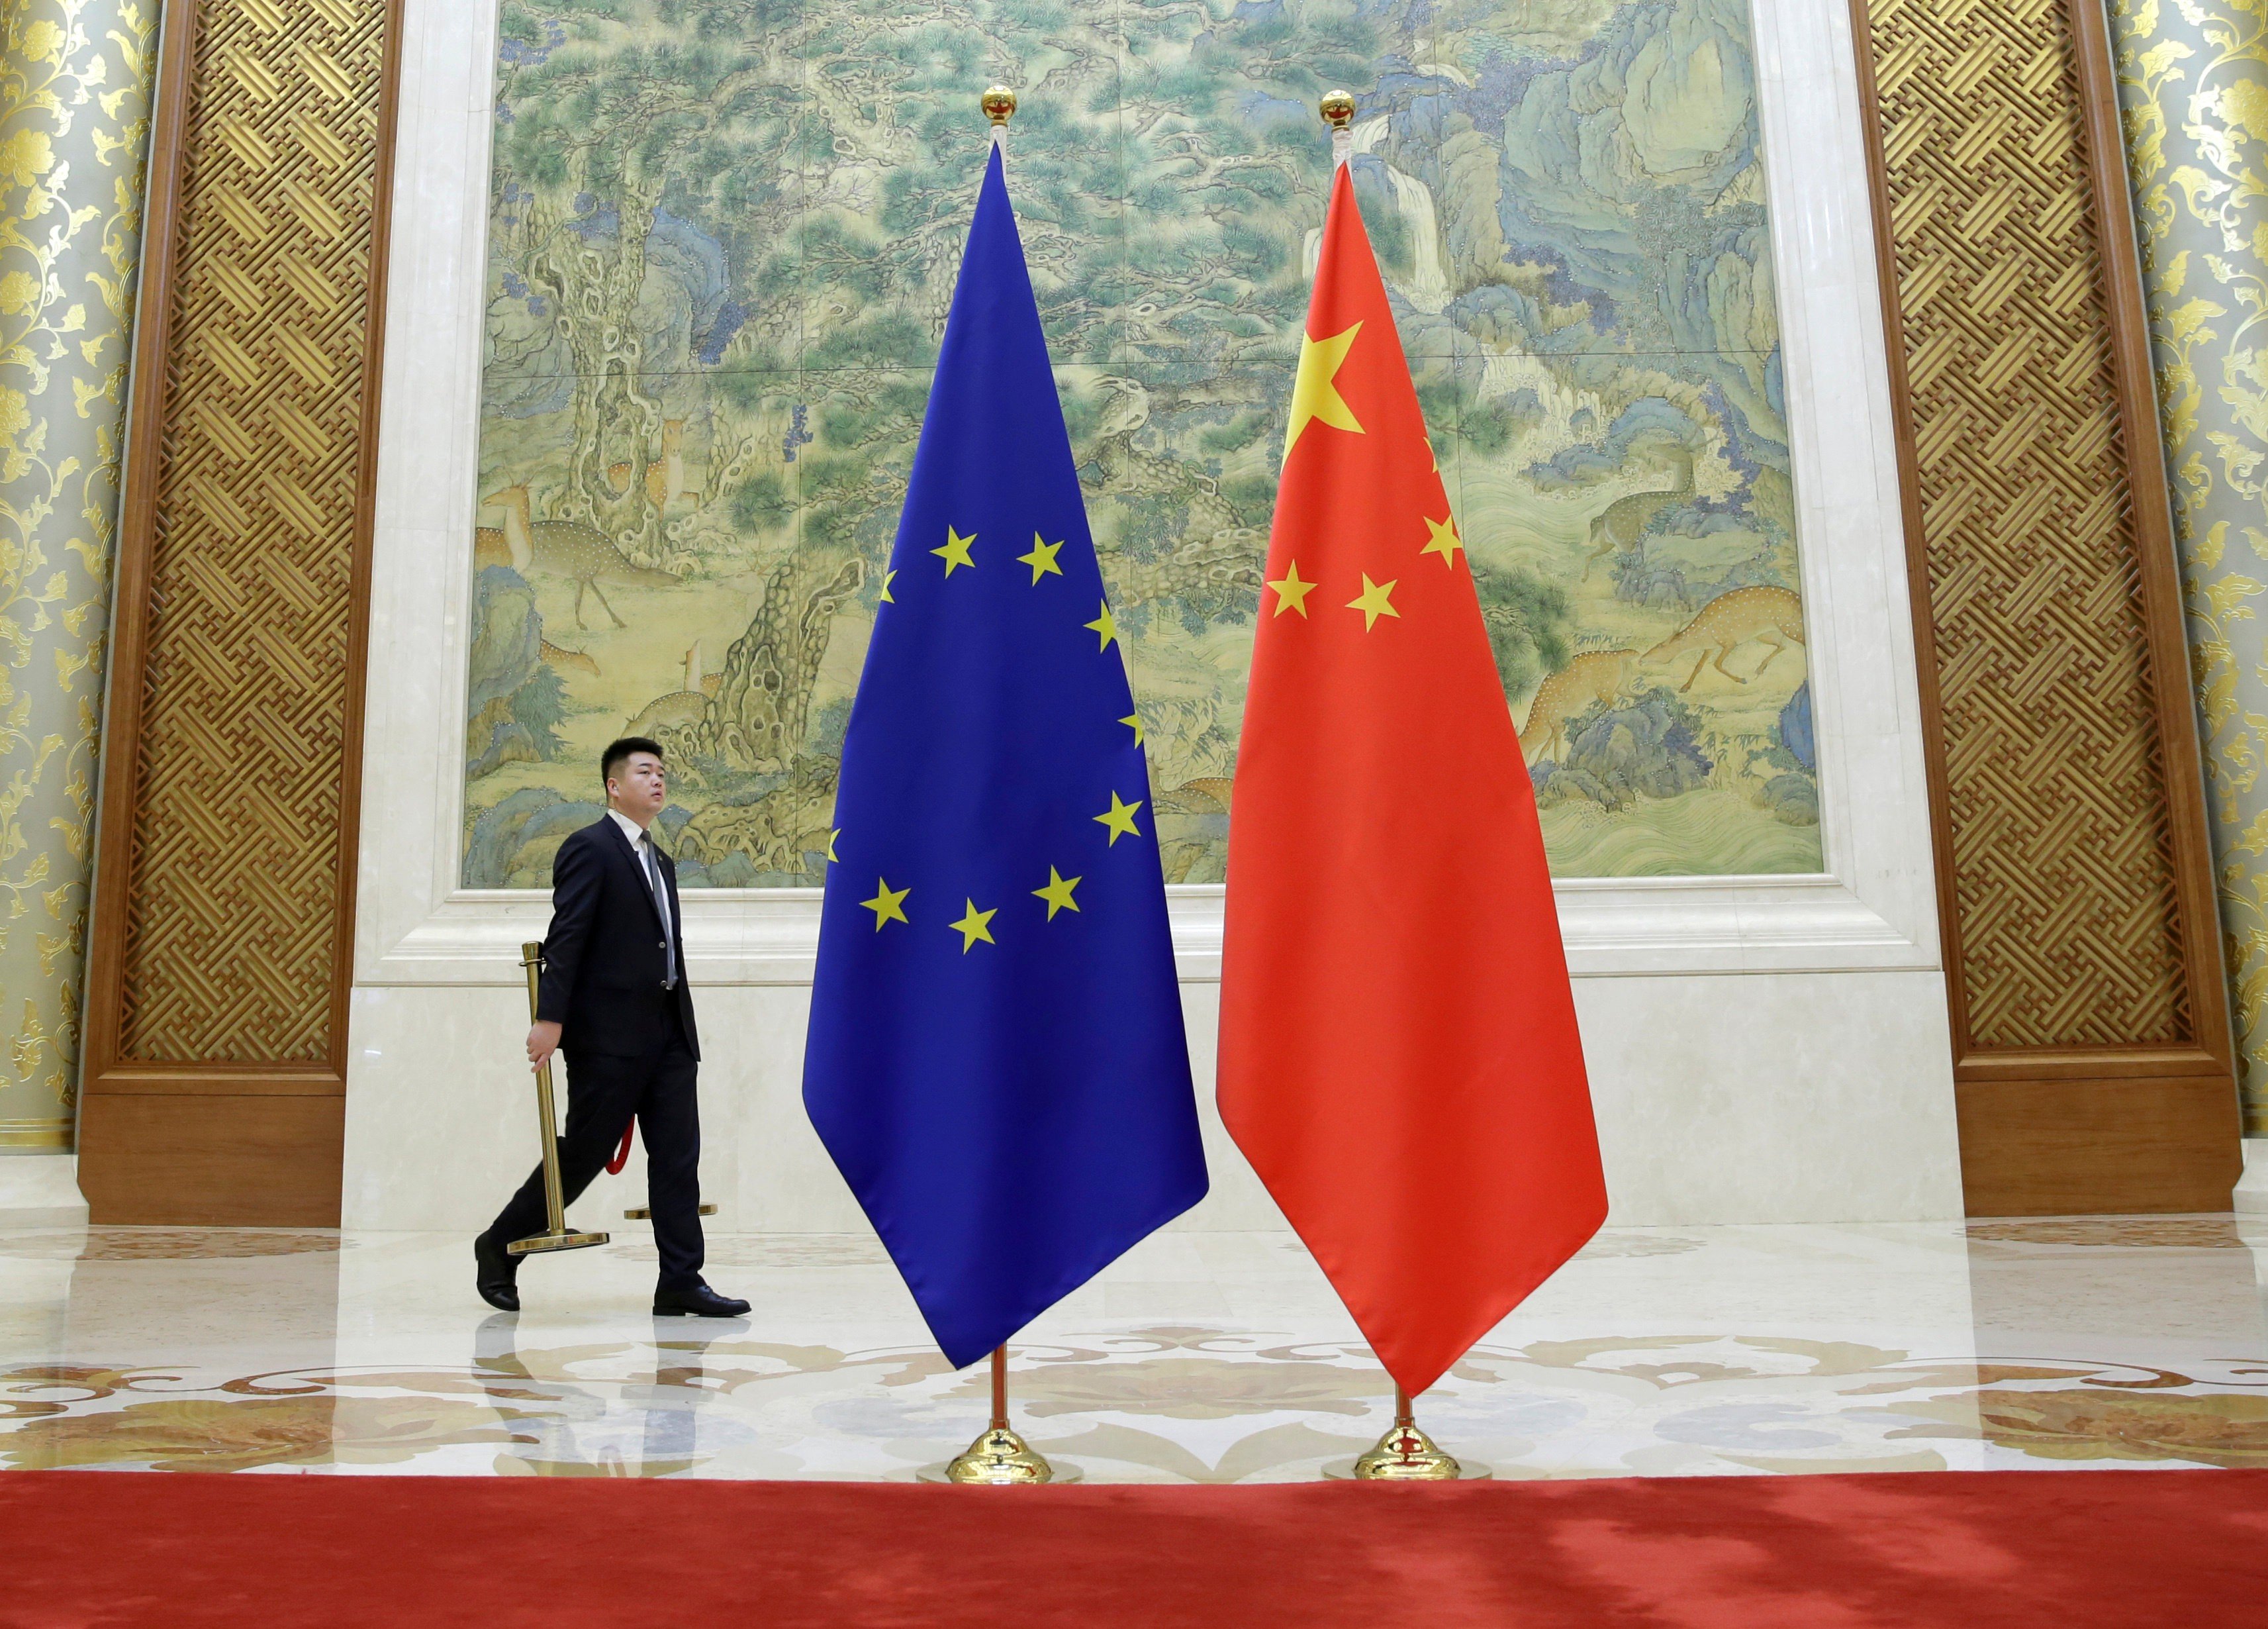 Europe has become increasingly wary about China’s influence. Photo: Reuters